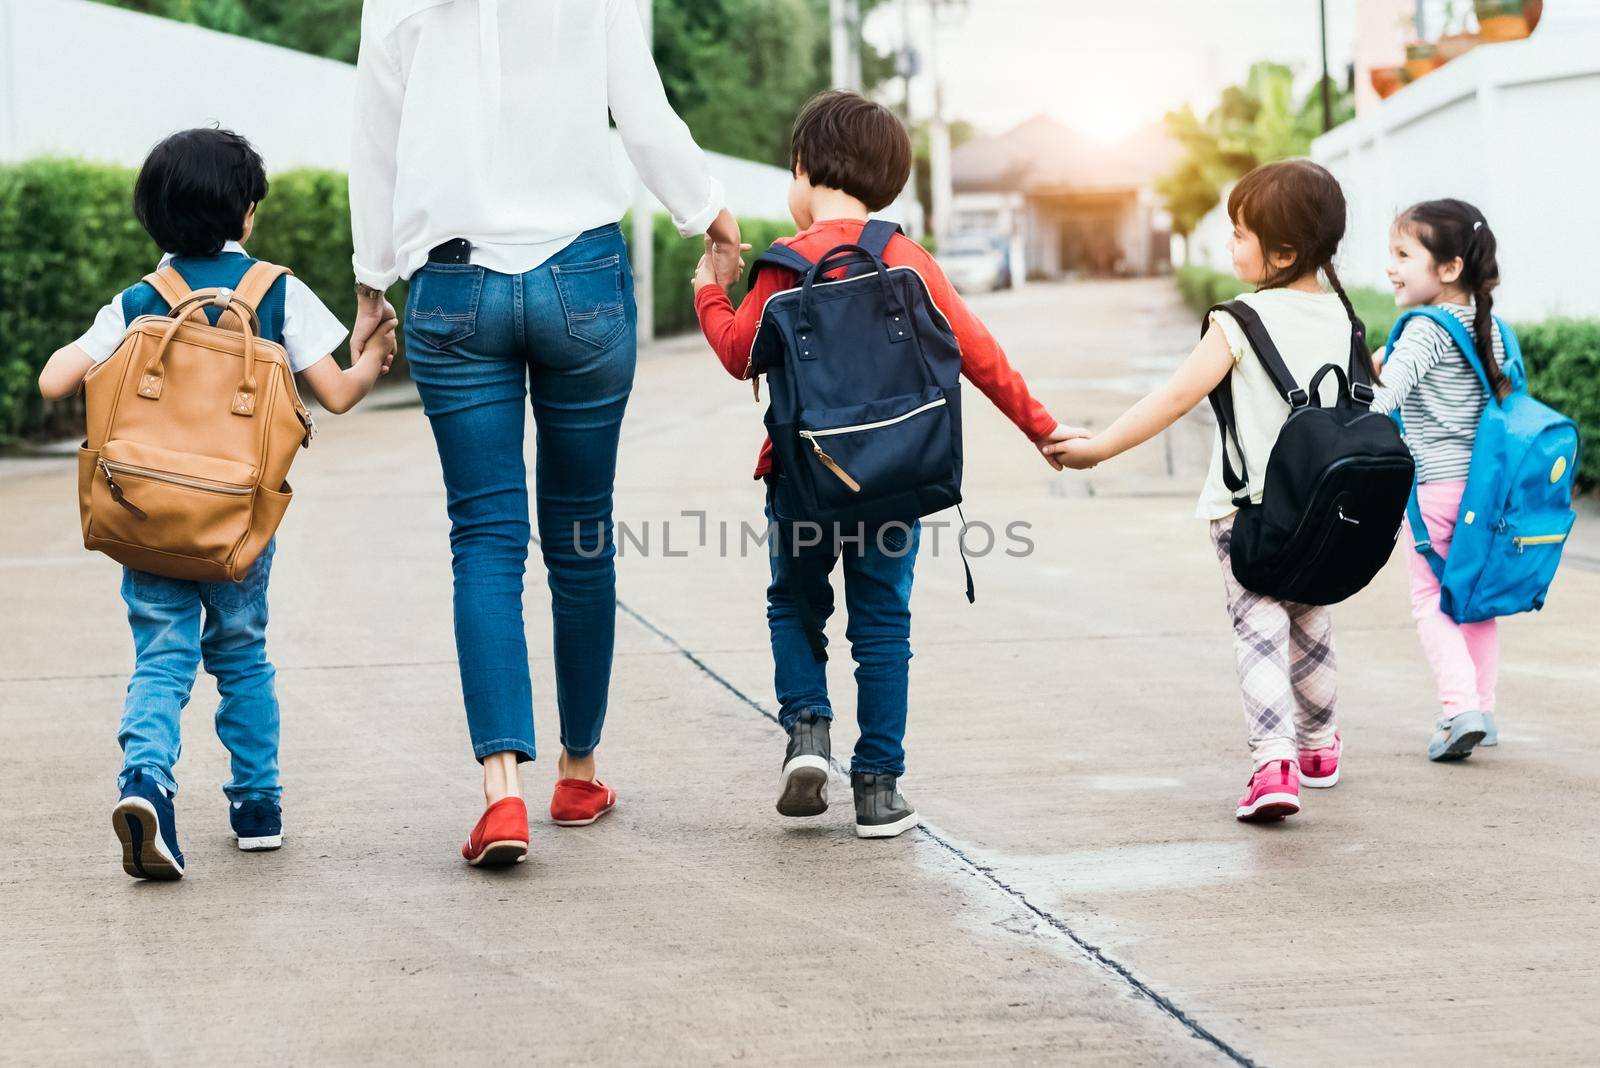 Back to school students mother group going school together. Parent send little boy and girl for first class semester term with schoolbag or satchel together. Collaborative learning and empathy daycare